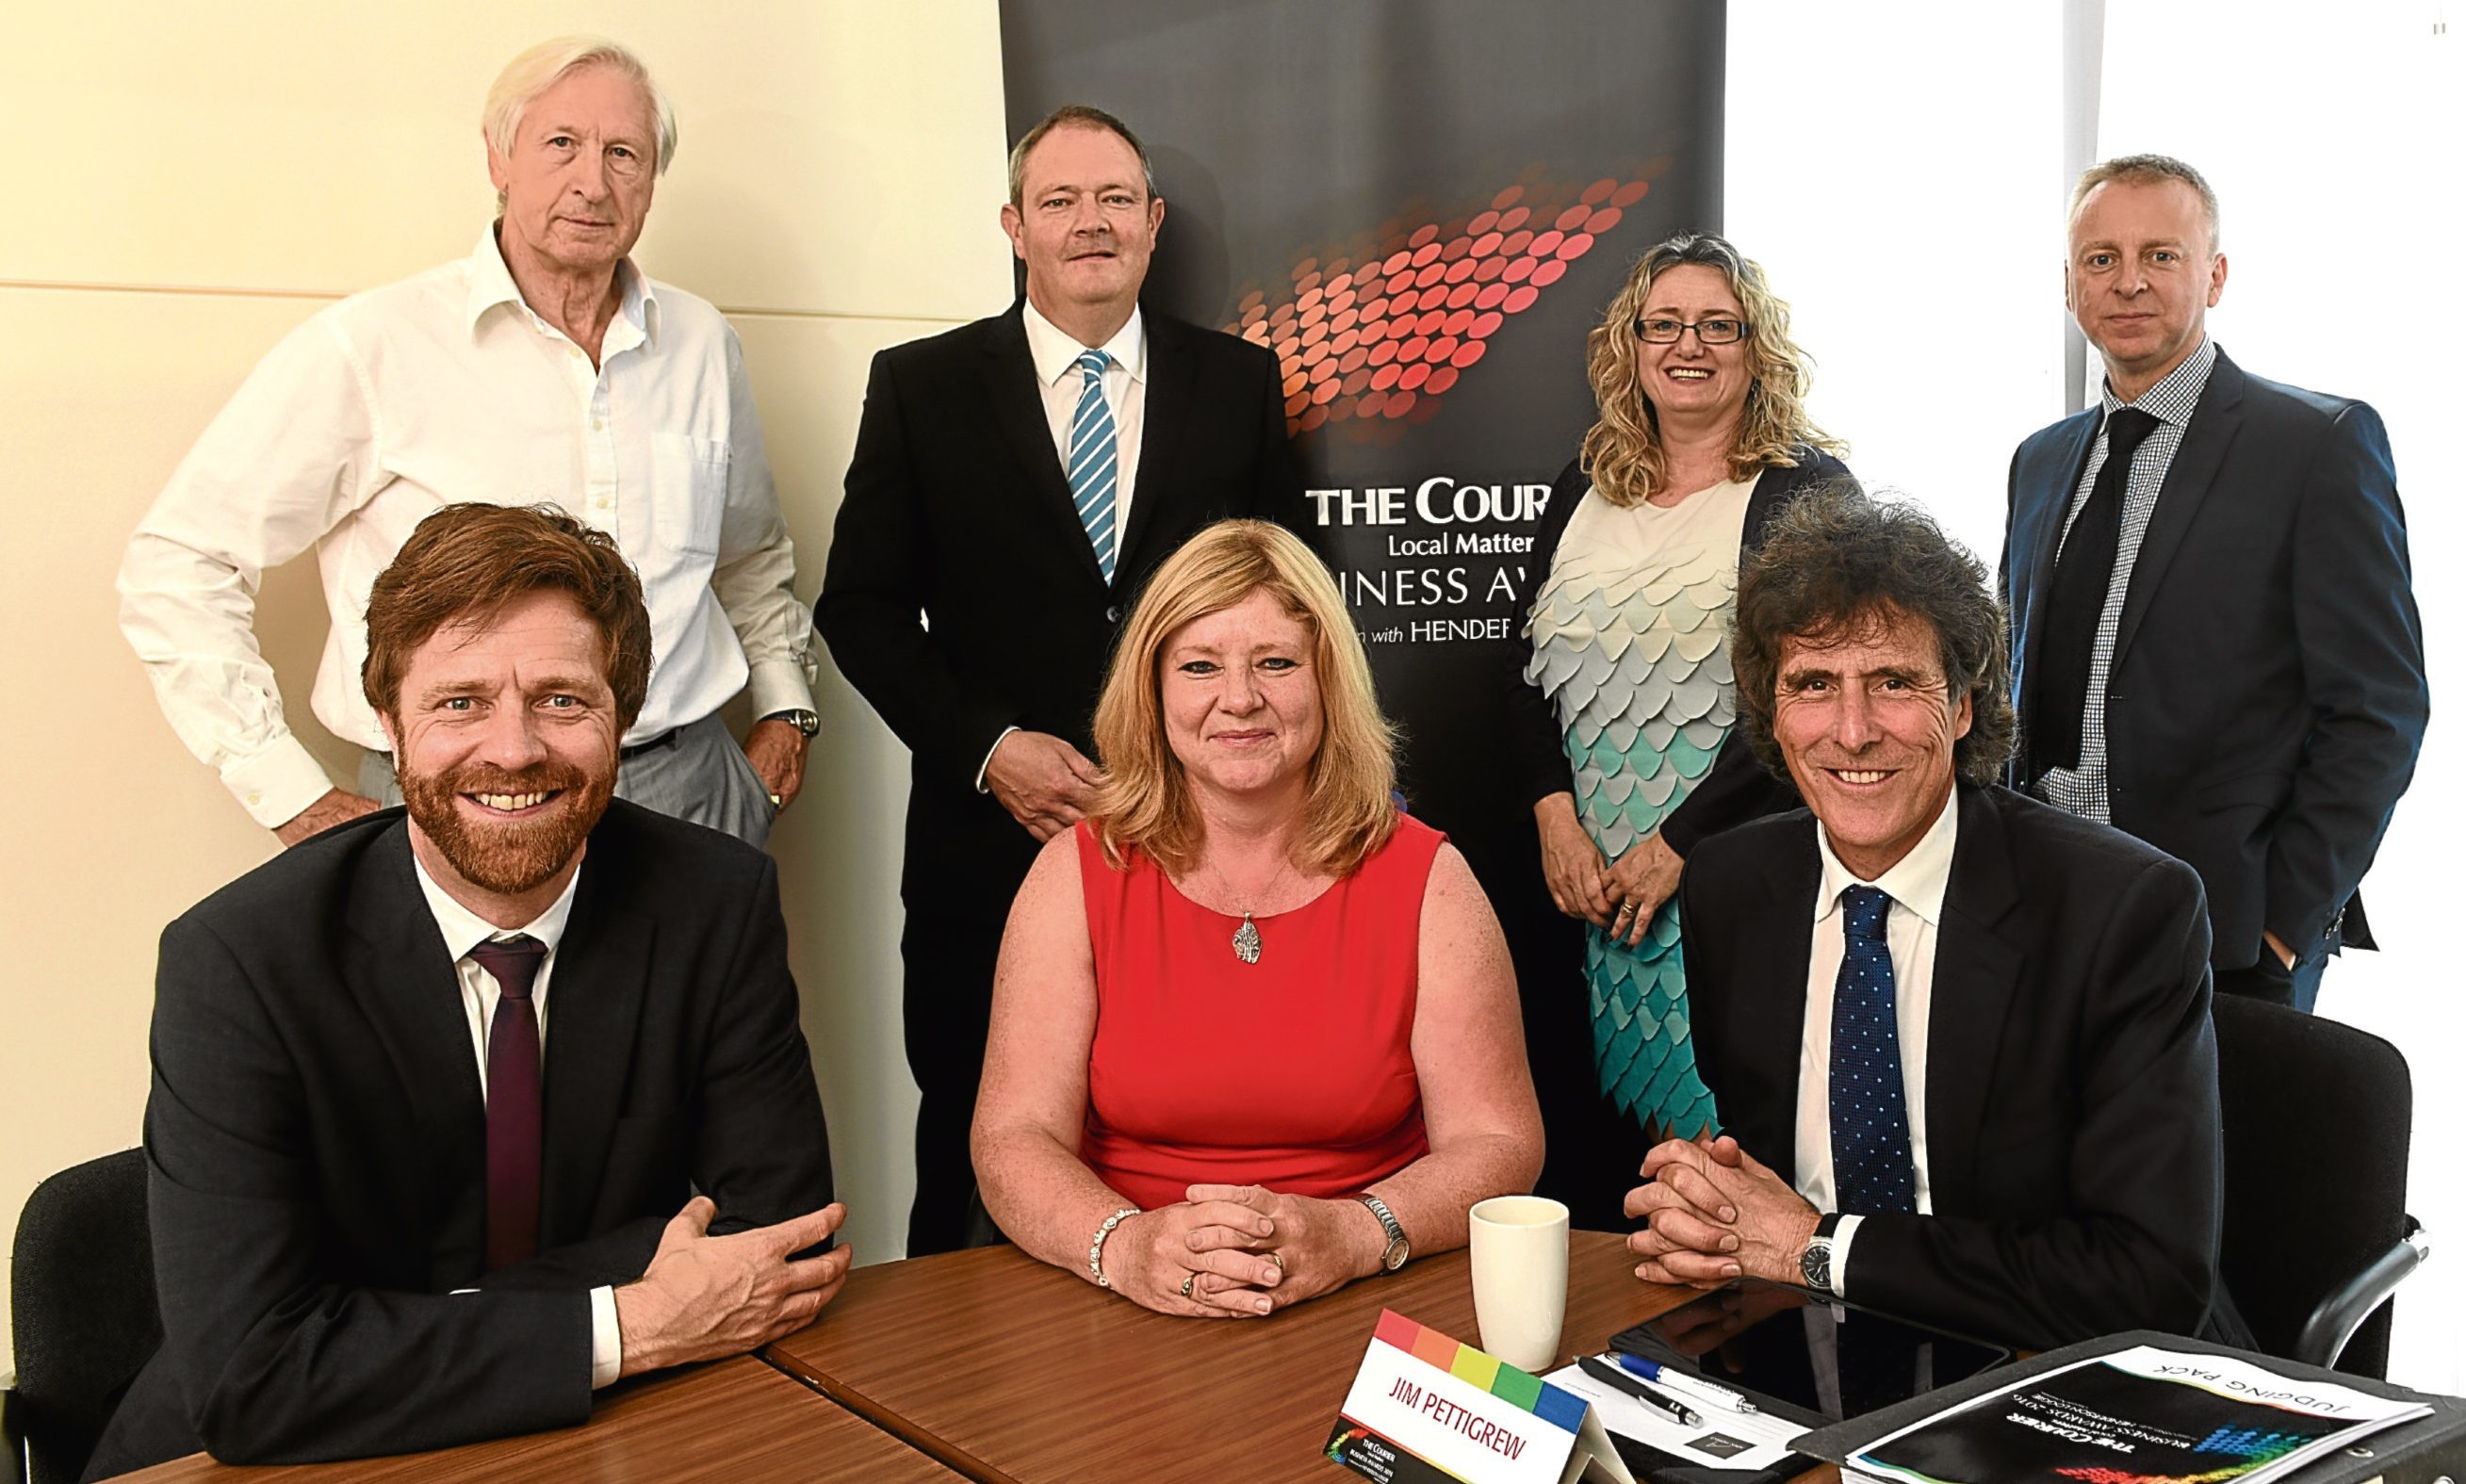 The judging panel for the Courier Business Awards 2016. Back from left: Nick Kuenssberg, Richard Neville, Alison Henderson, Philip Long. Front: David Smith, Jackie Waring and panel chairman Jim Pettigrew.